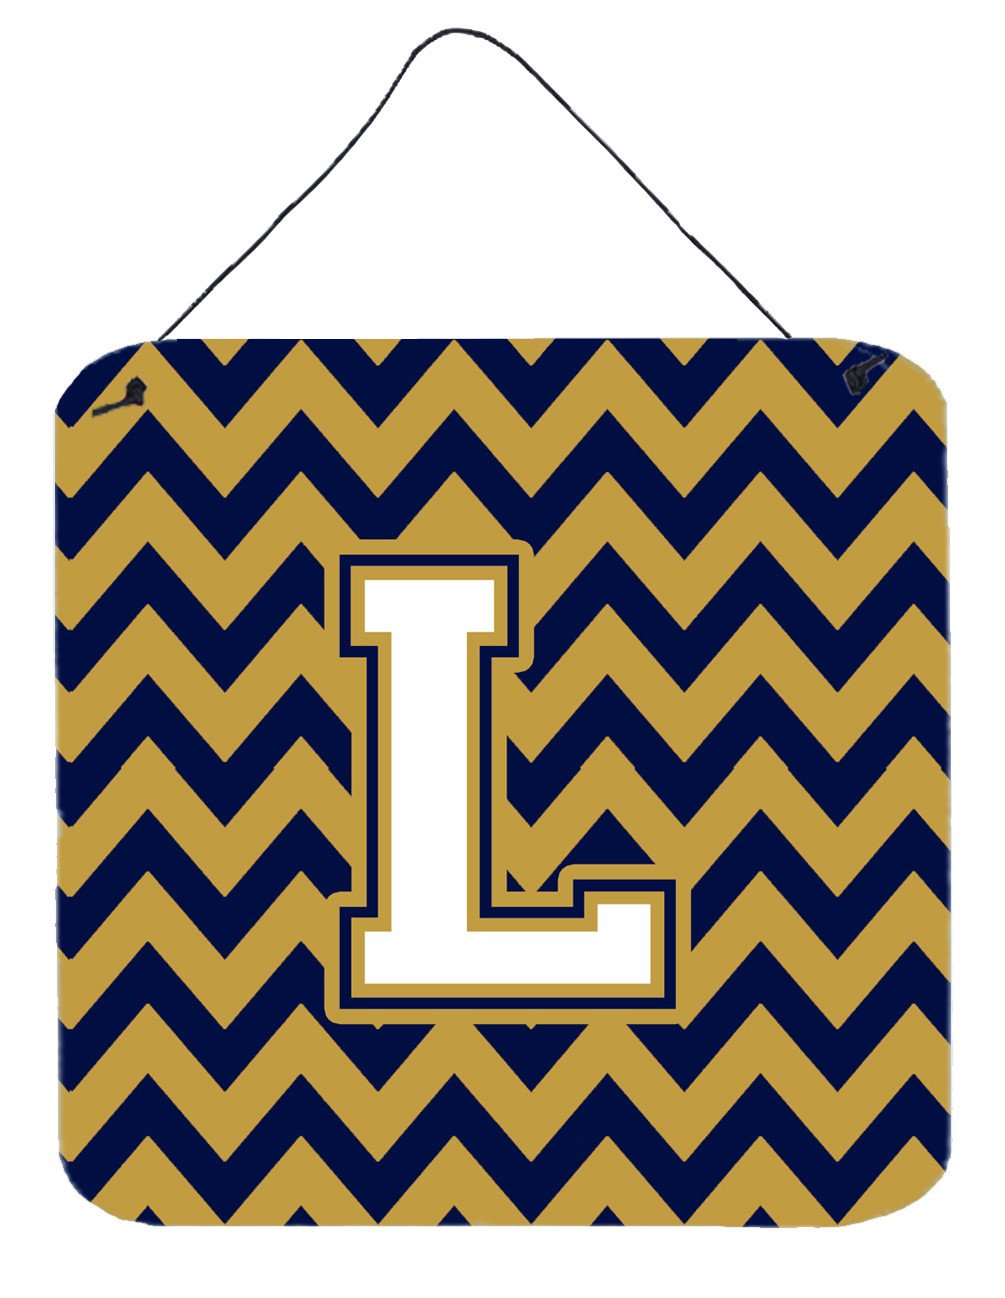 Letter L Chevron Navy Blue and Gold Wall or Door Hanging Prints CJ1057-LDS66 by Caroline's Treasures